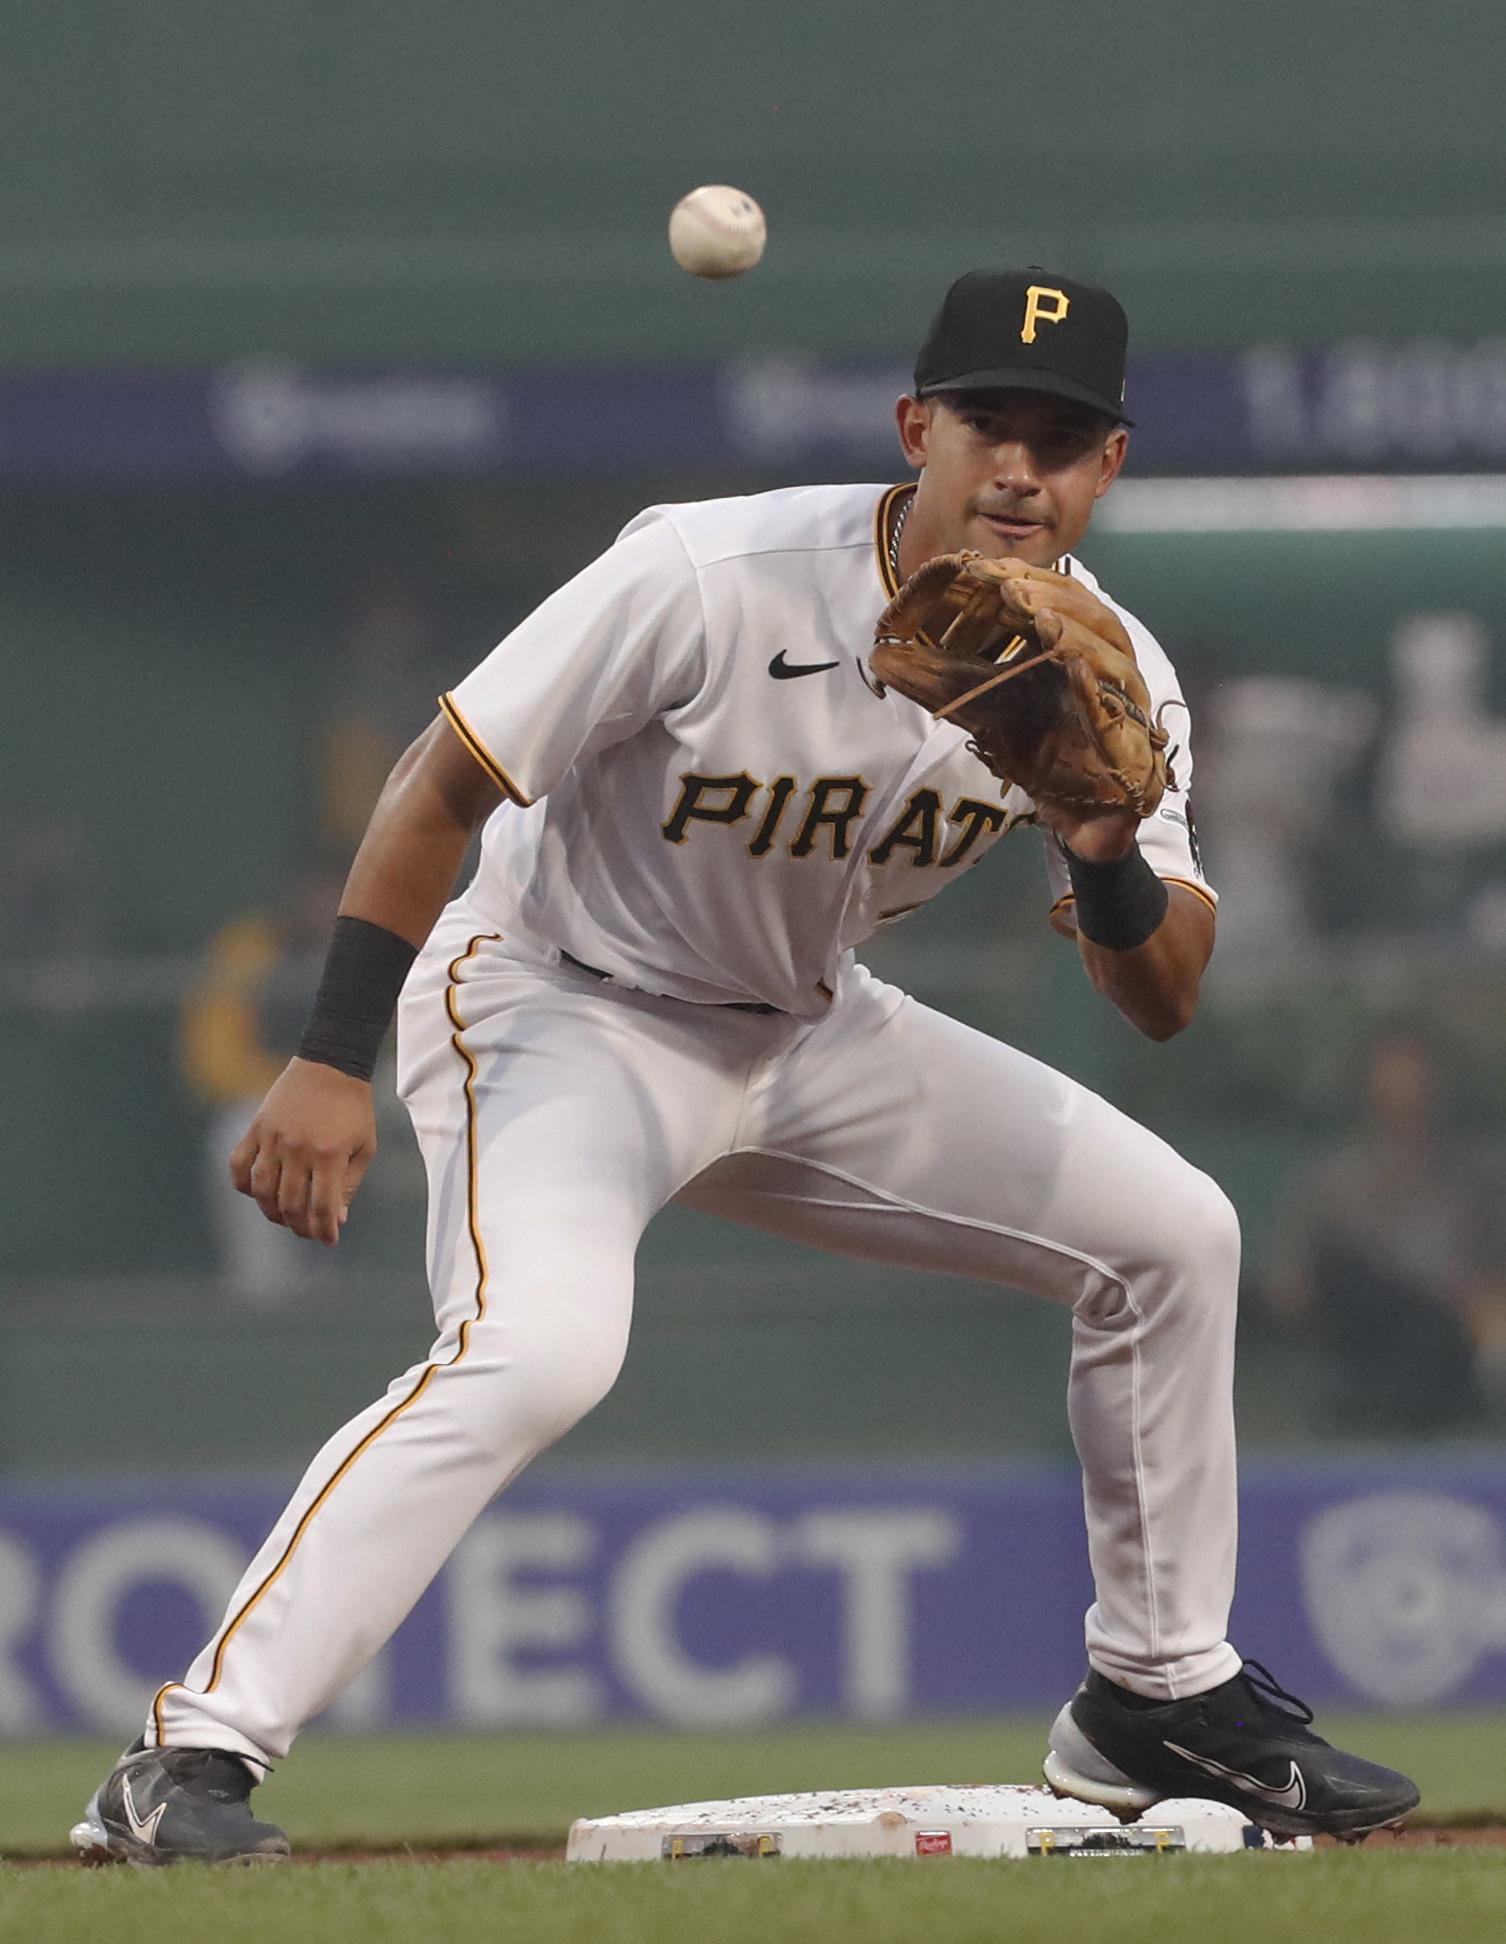 Five-run inning gives Pirates another win over Padres | Reuters